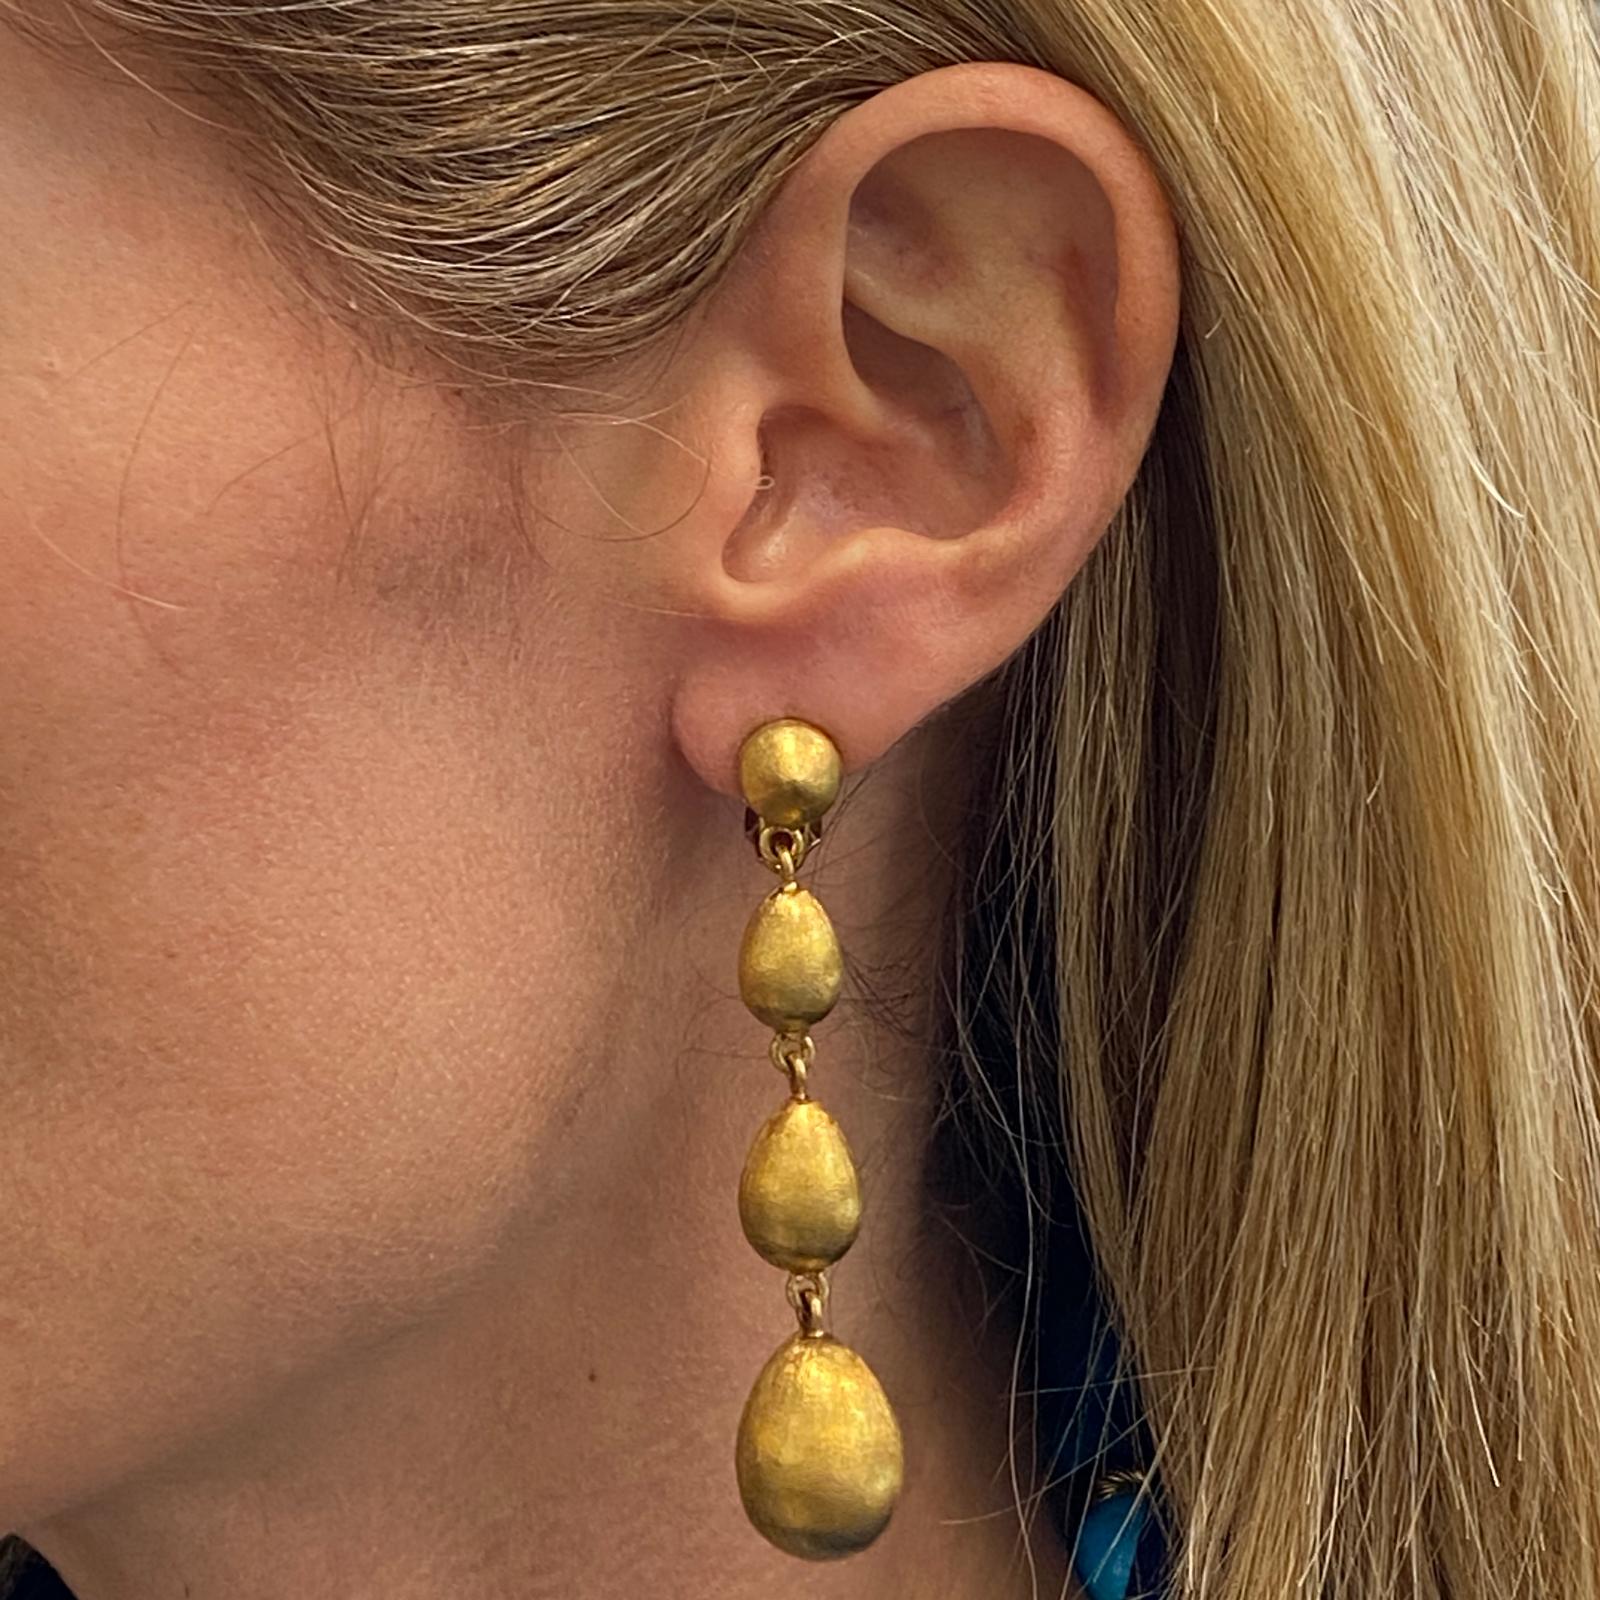 Beautiful drop earrings fashioned in satin finished 18 karat yellow gold. The earrings measure 2.75 inches in length and feature leverbacks. 